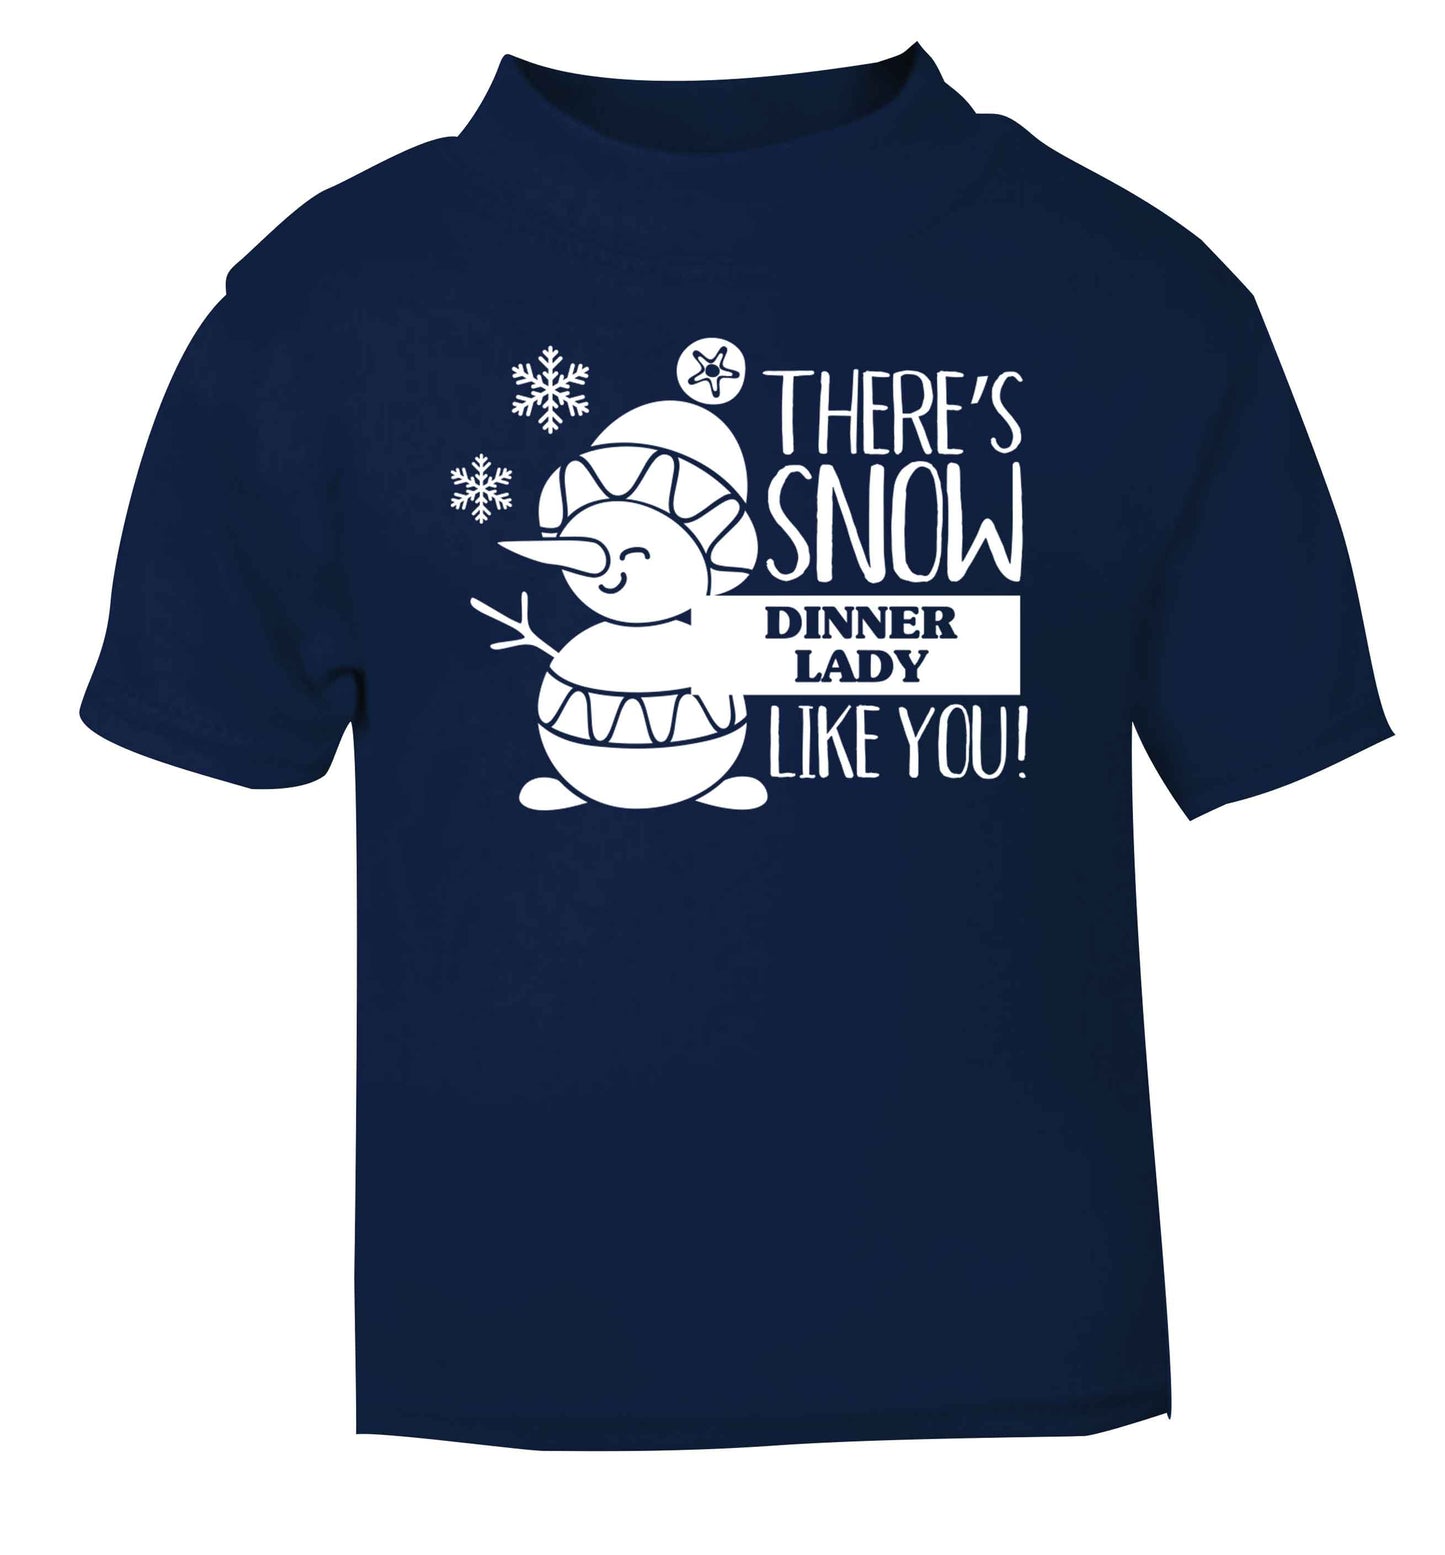 There's snow dinner lady like you navy baby toddler Tshirt 2 Years